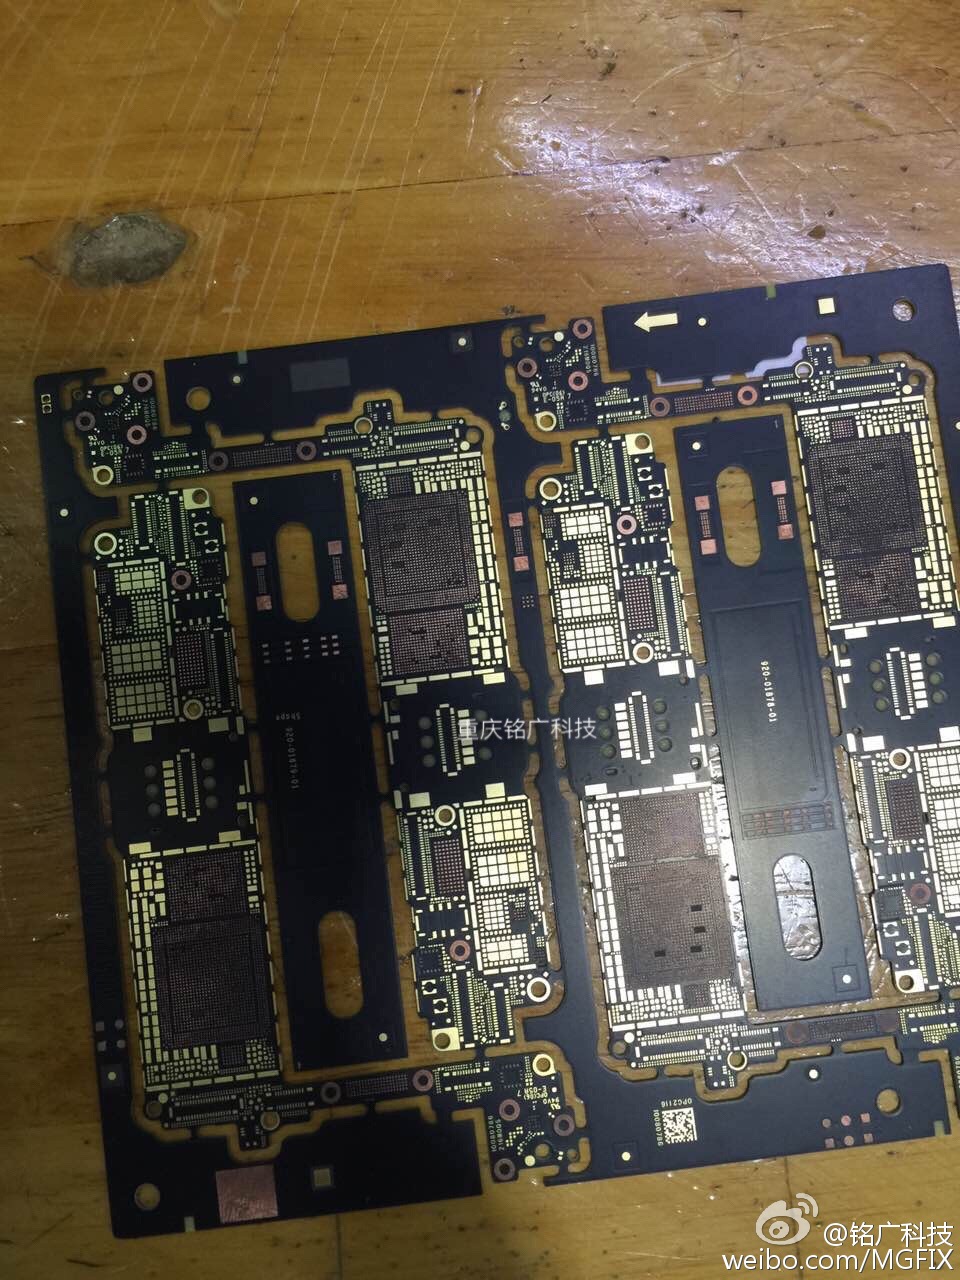 iPhone 7 PCB Leaked [Photos]